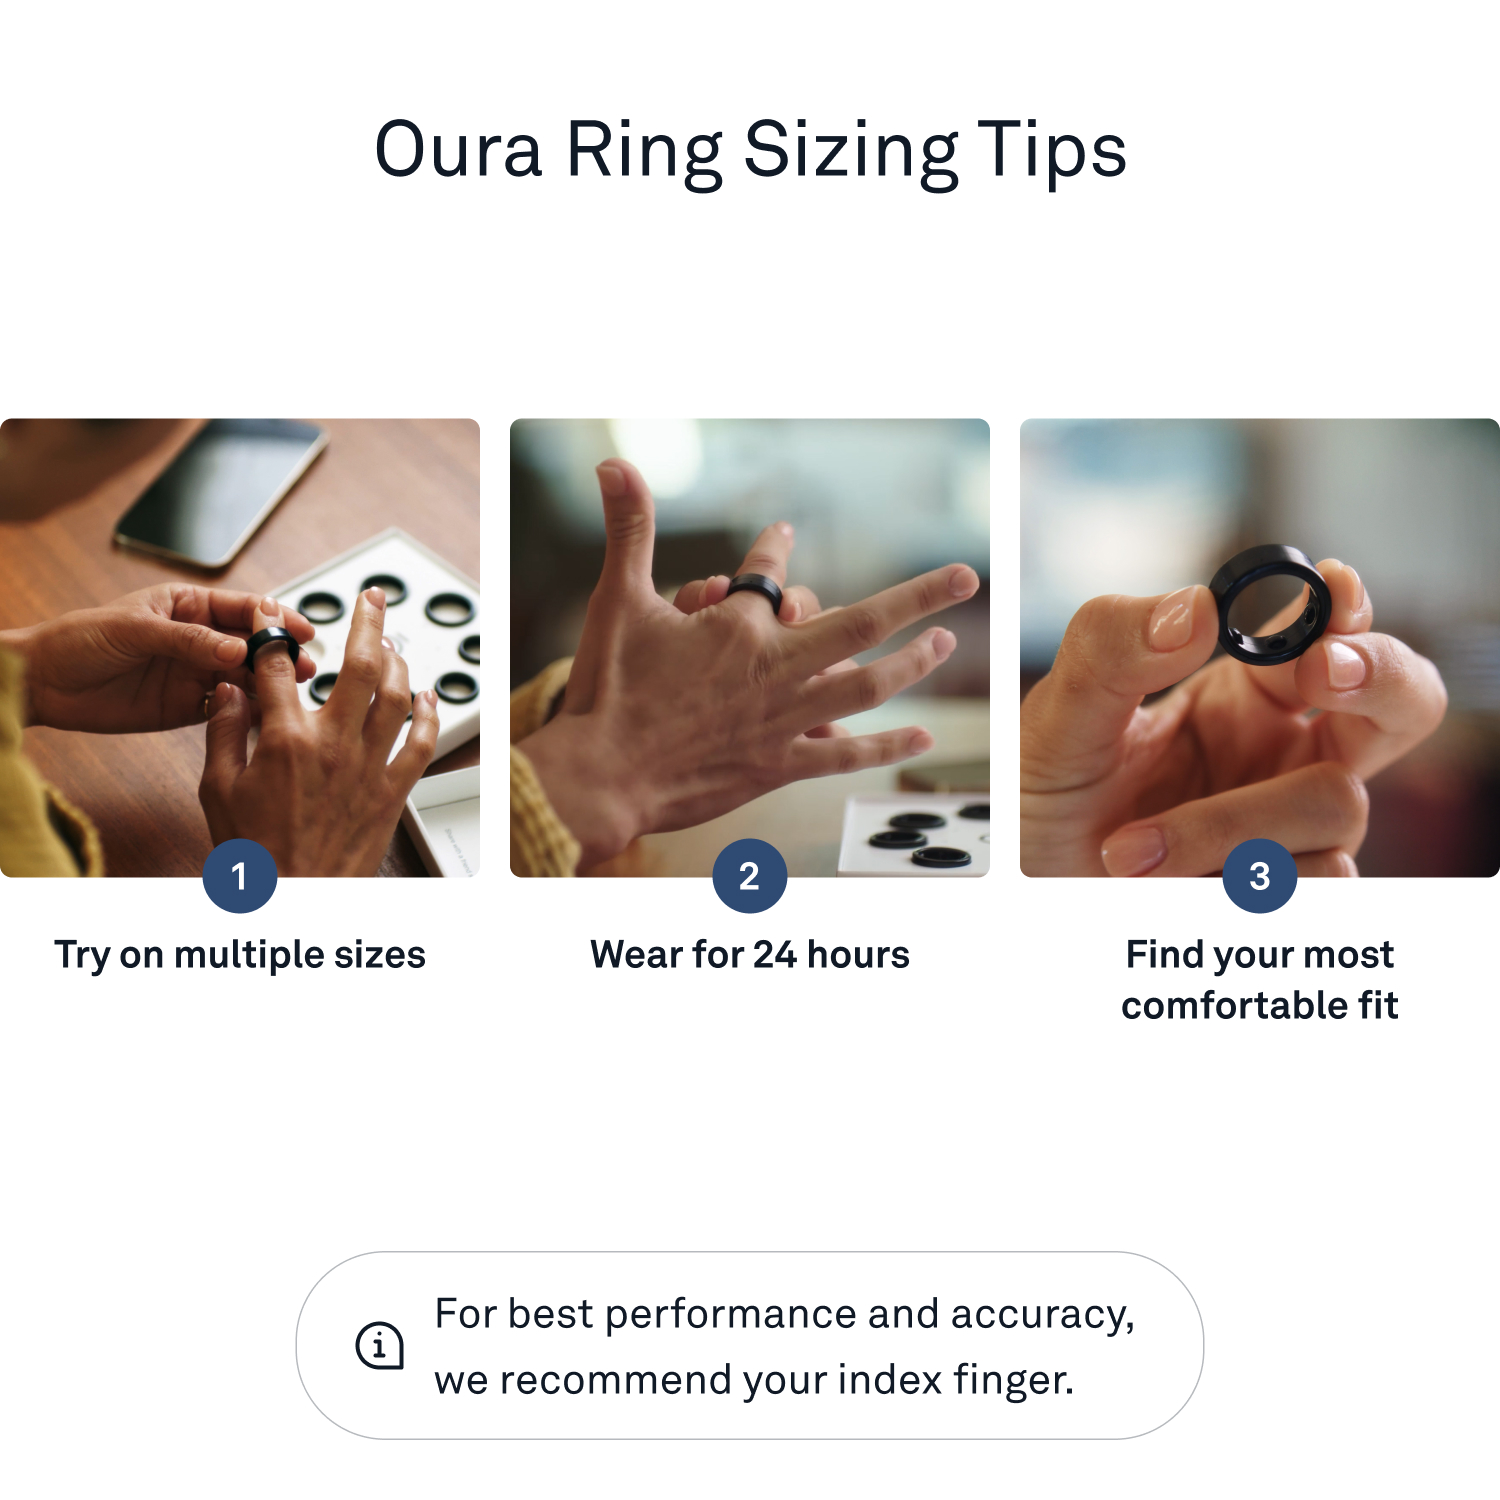 Oura Ring Gen3 Sizing Kit Size Before You Buy The Oura Ring Gen3 